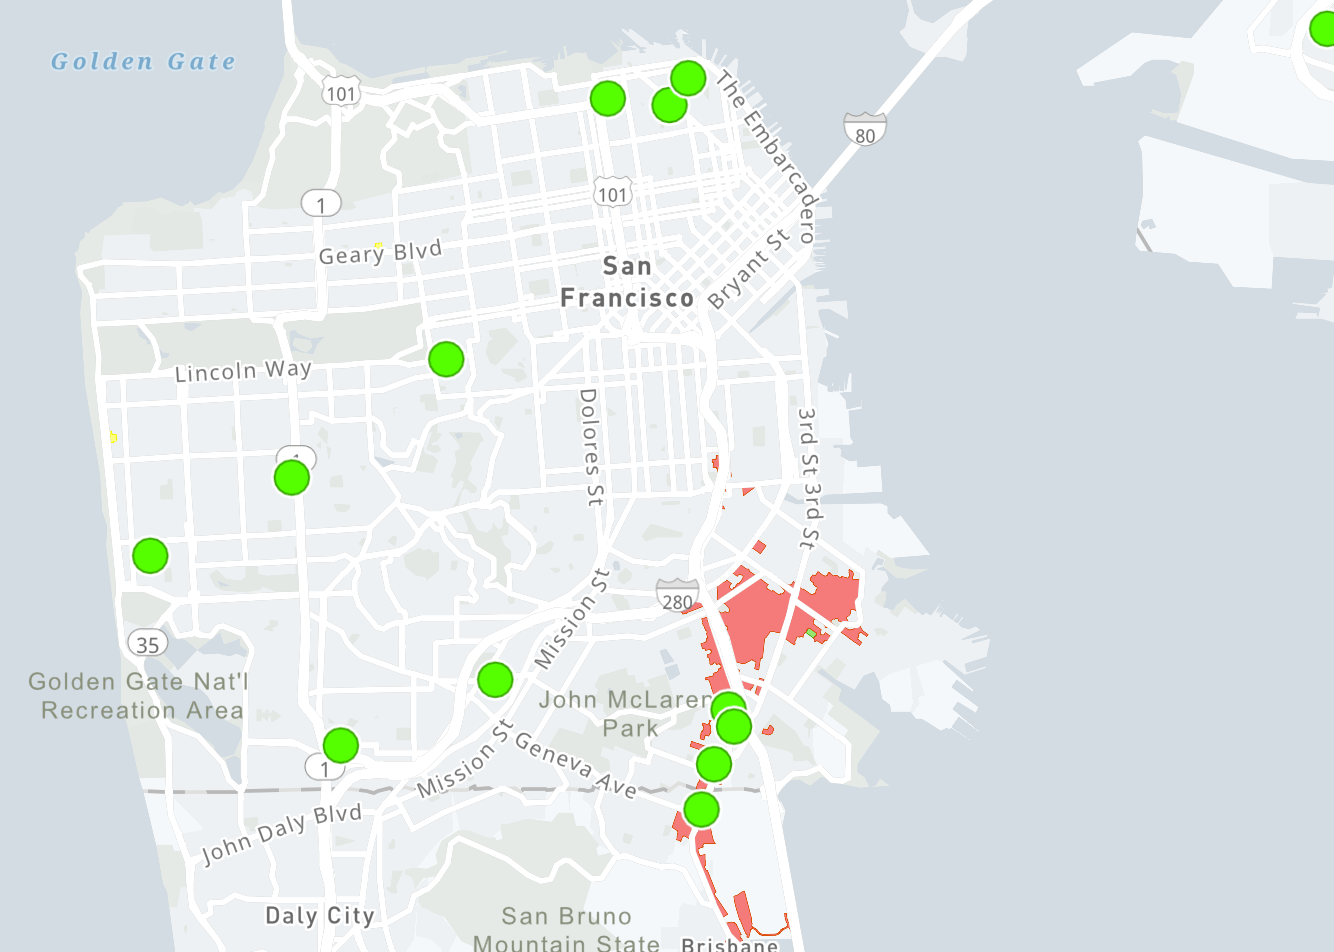 San Francisco Power Outage Affecting Thousands Resolved, PG&E Reports